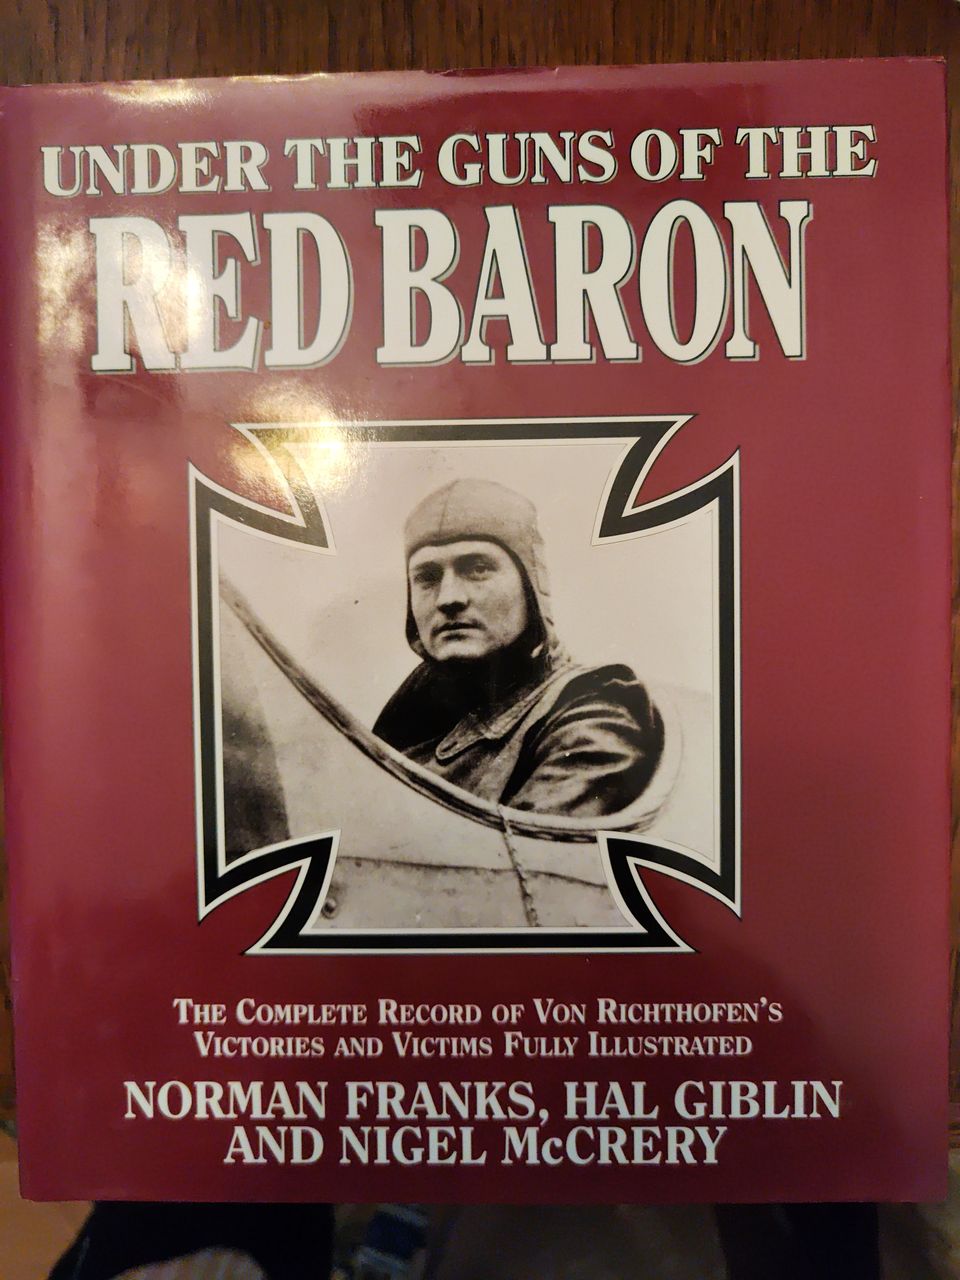 Under the guns of the red baron